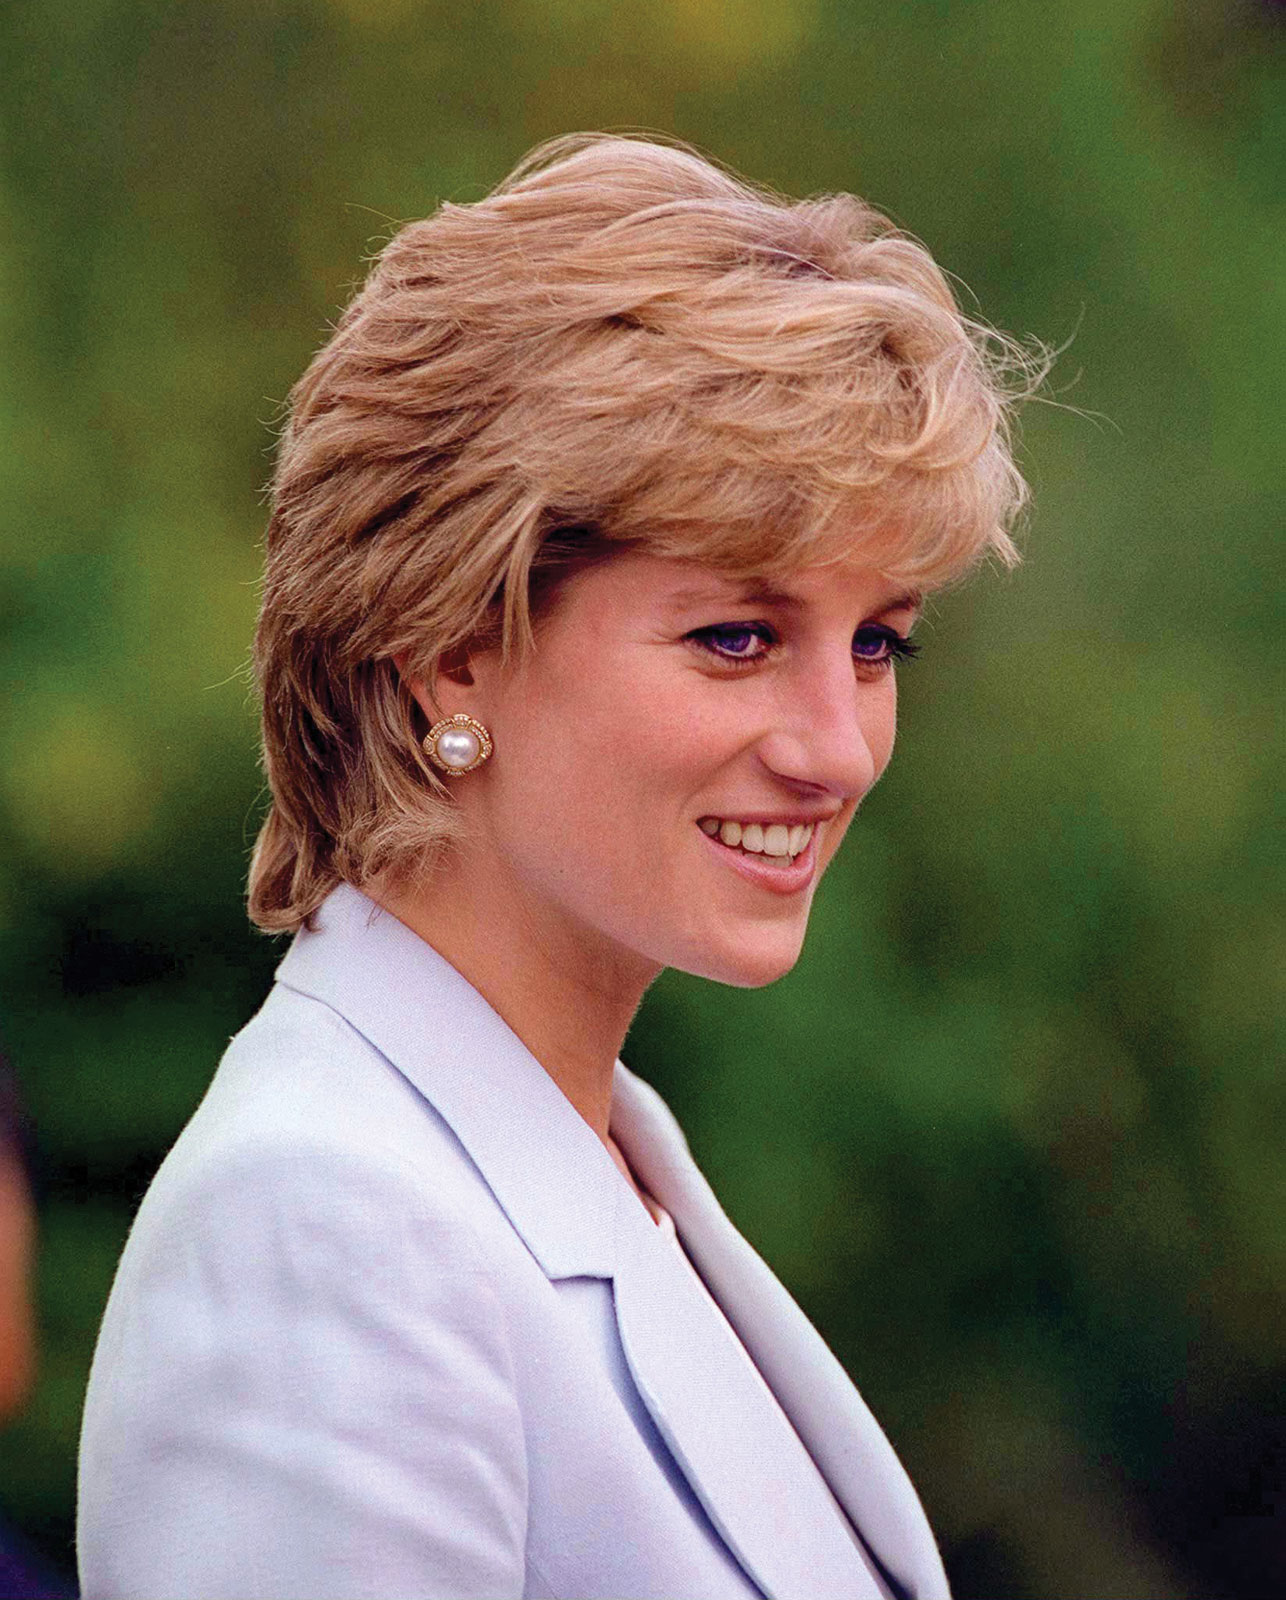 Download Latest HD Wallpapers of  Celebrities Princess Diana